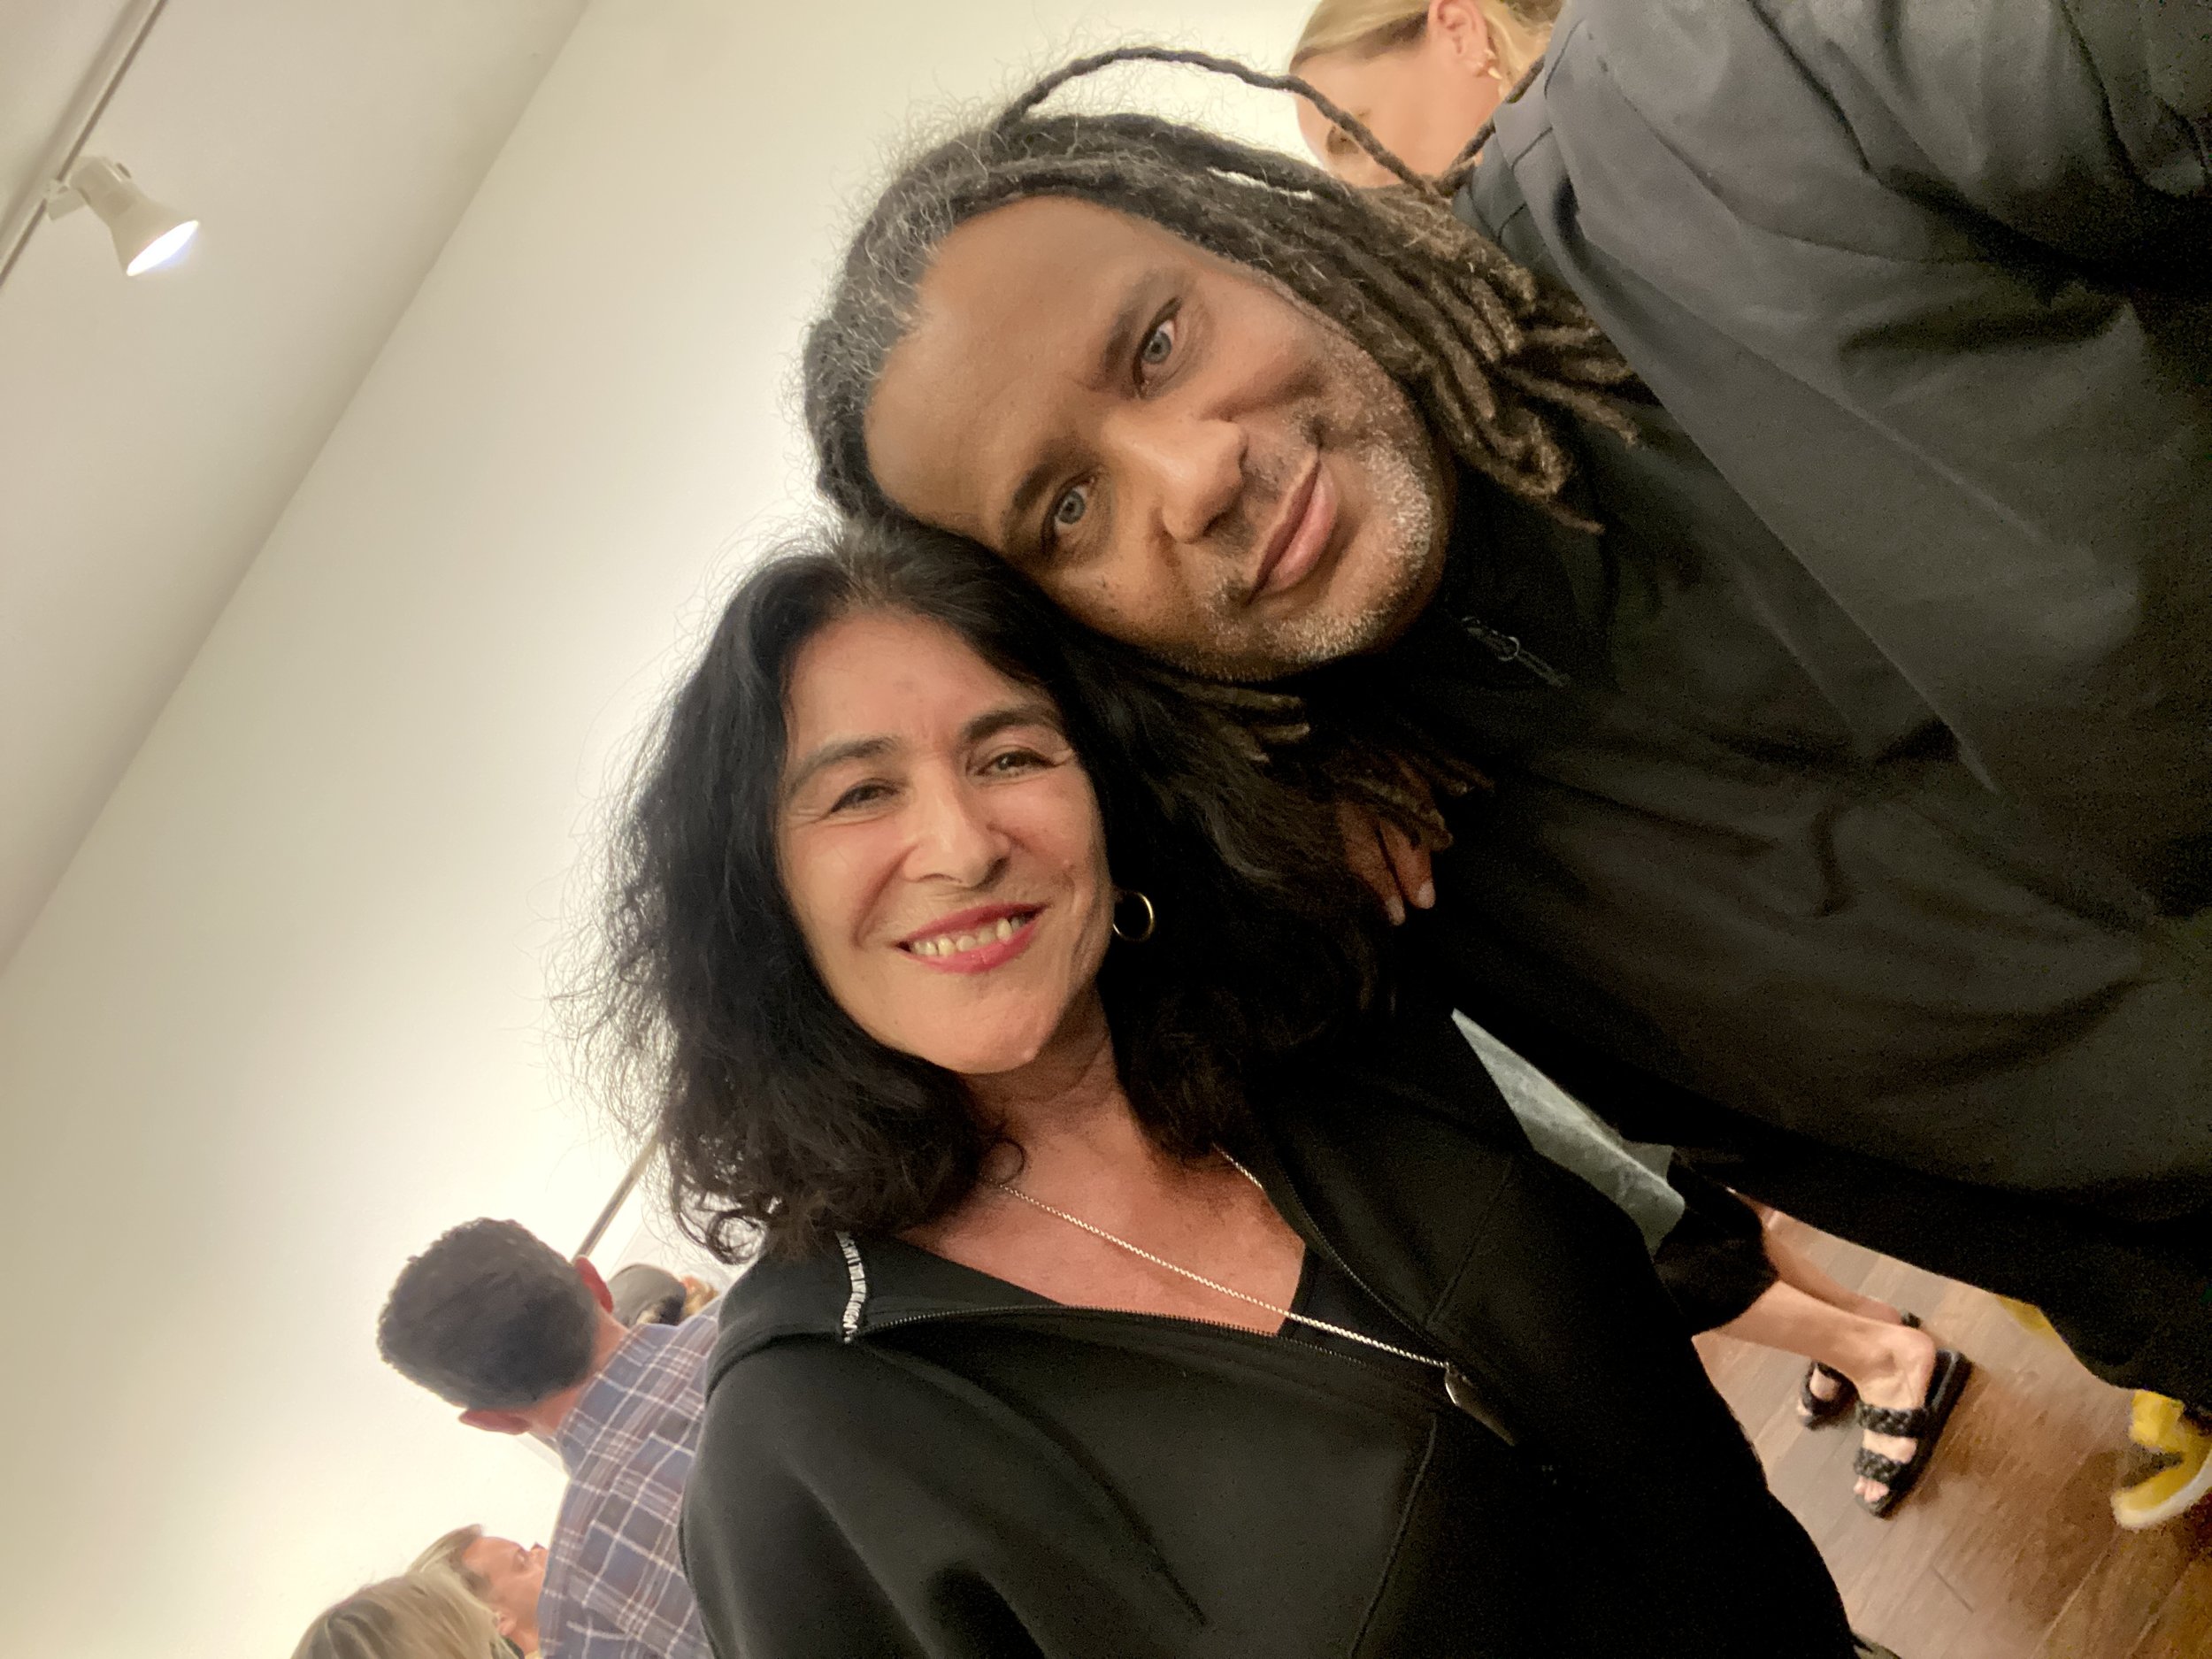 Photographer Julian Lucas with Janette Beckman Fahey/Klein Gallery (Los Angeles) 2022